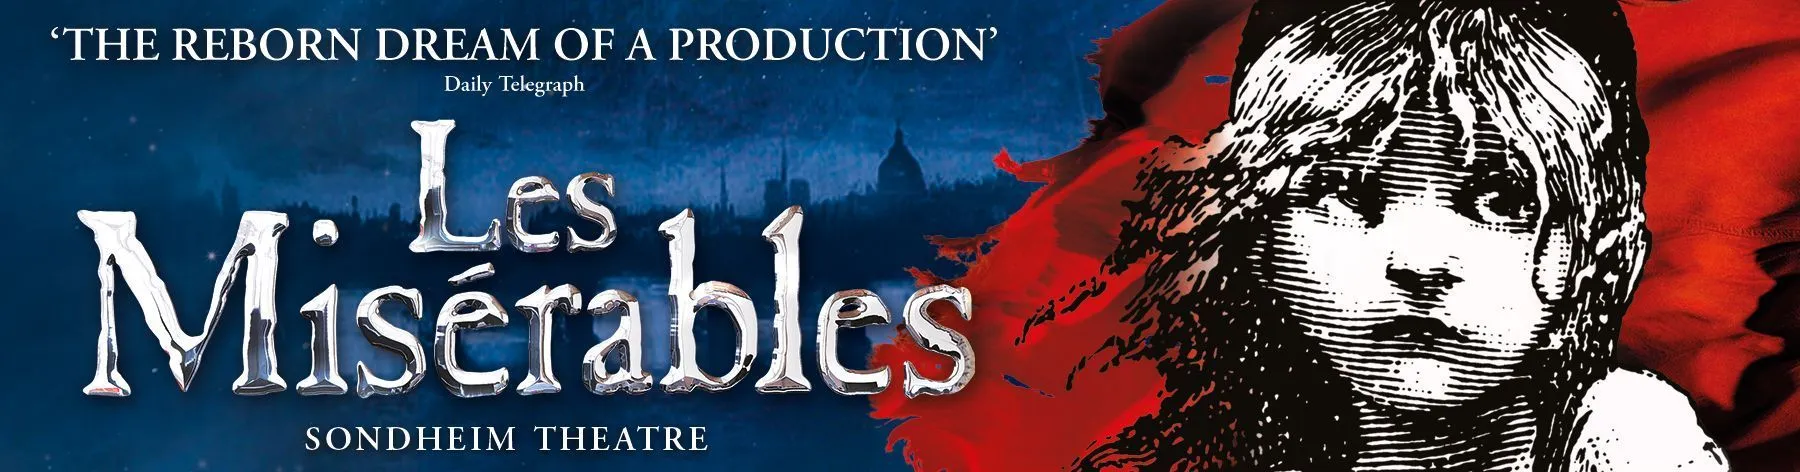 This is the world's most famous musical, having opened in 53 countries and in 22 languages. Buy Les Misérables London tickets now.